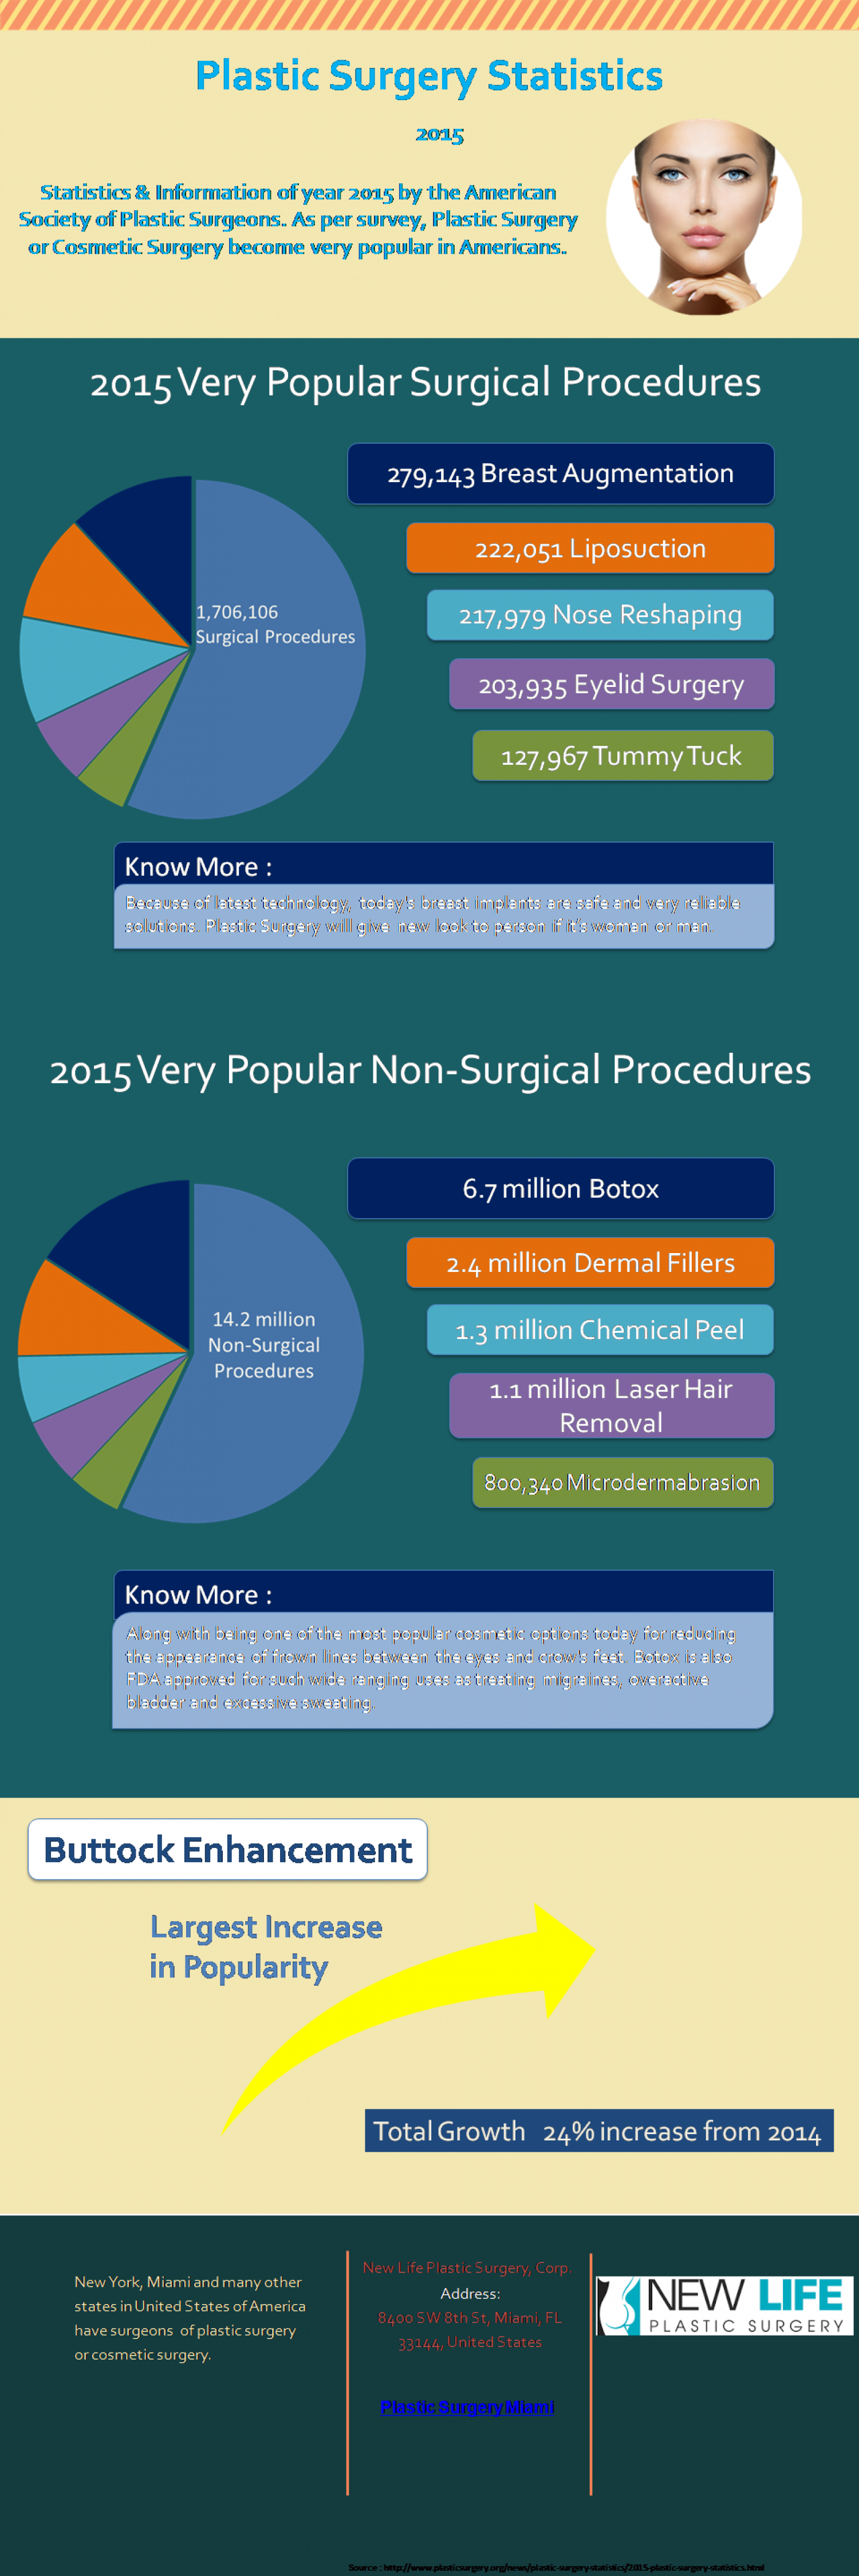 Cosmetic surgery is on the rise, new data reveal